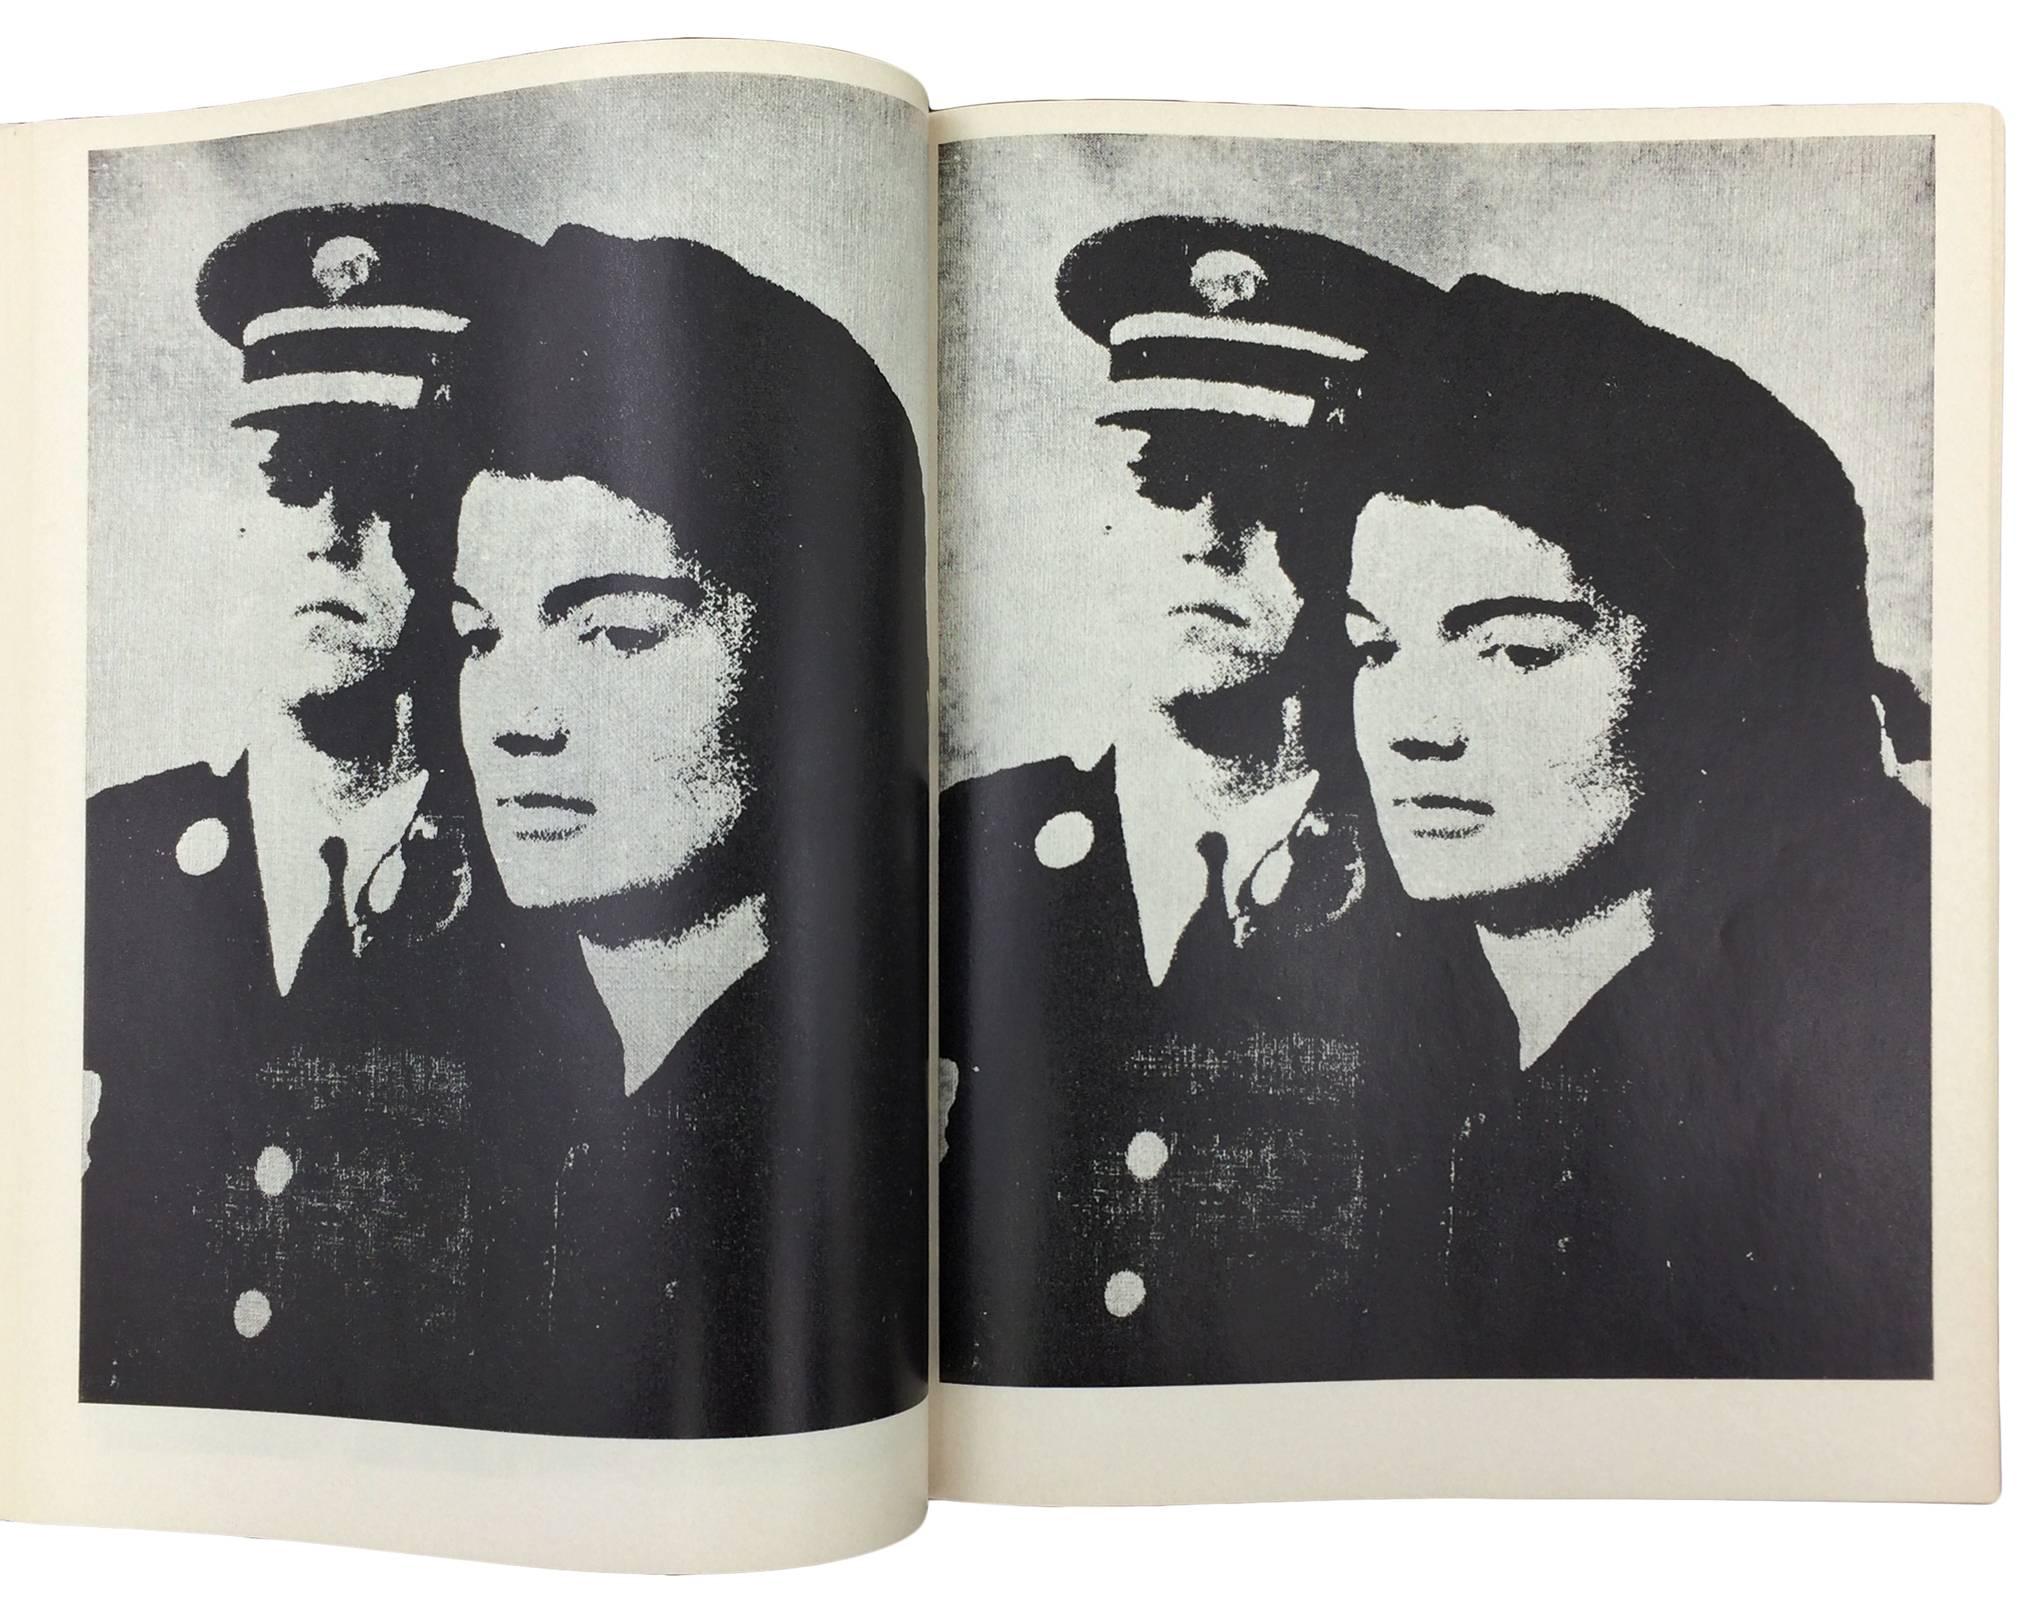 Andy Warhol. [Exhibition catalogue]. [17] pp. including title-page and numerous quotations by the artist, followed by hundreds of full-page black and white photographic illustrations. Large 4to., 268 x 210 mm, bound in original wrappers featuring